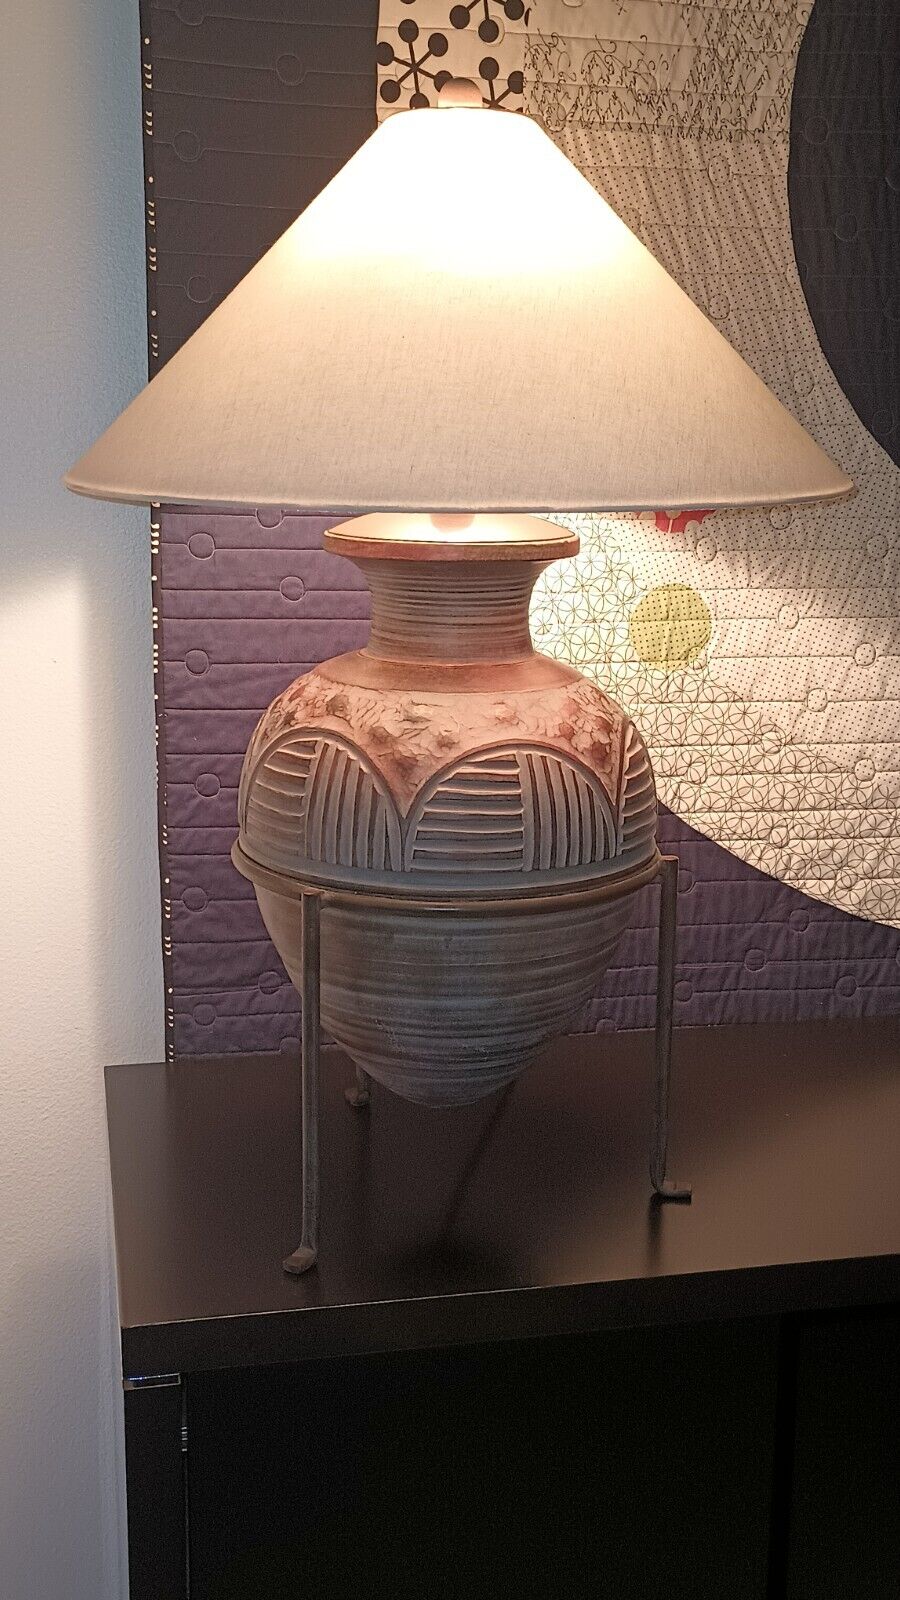 Vintage Casual Lamps of California @ 1997 ~ cone shaped w/metal stand